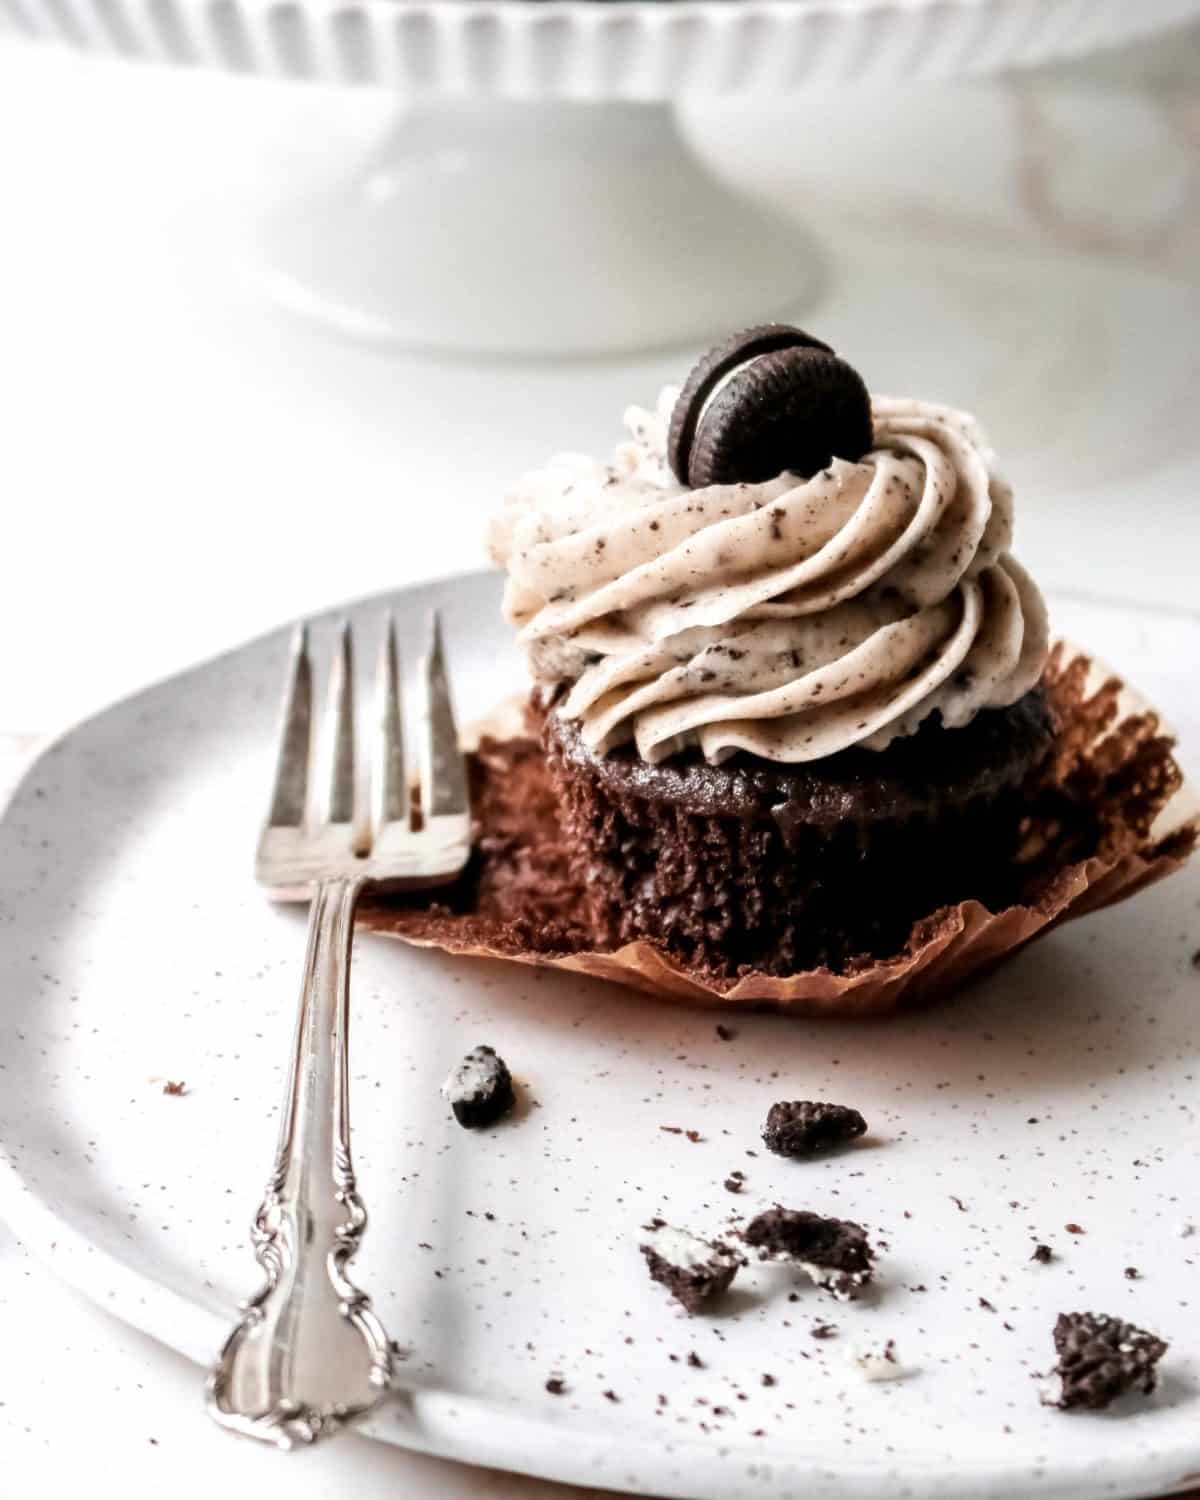 A chocolate cupcake on a plate with a fork and Oreo cookie crumbs.